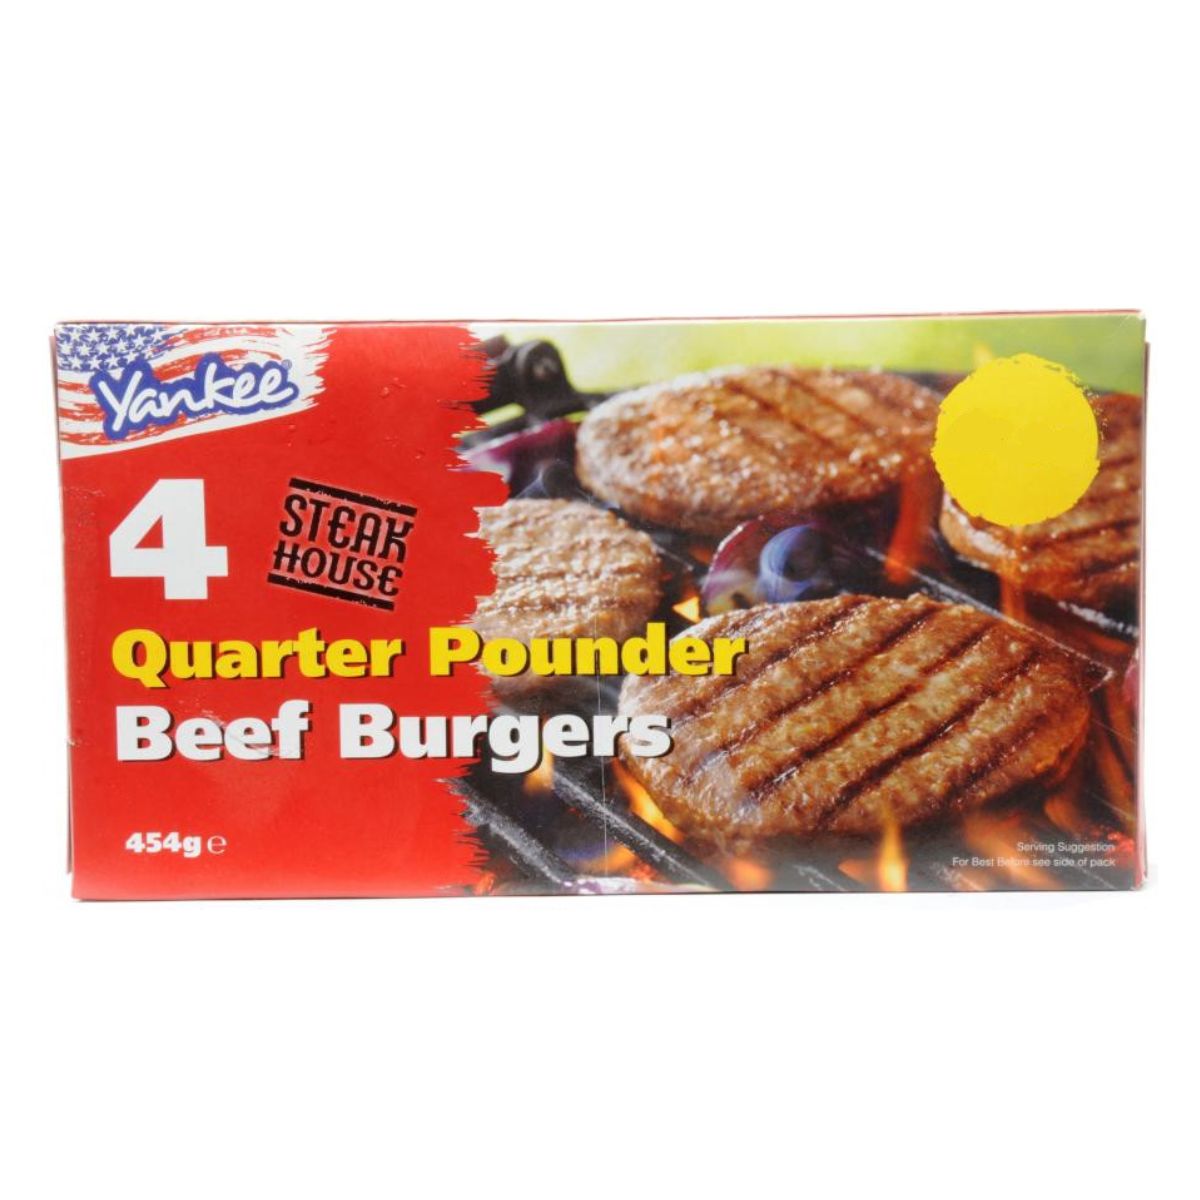 A box of Yankee - 4 Quarter Pounder Beef Burgers - 454g.